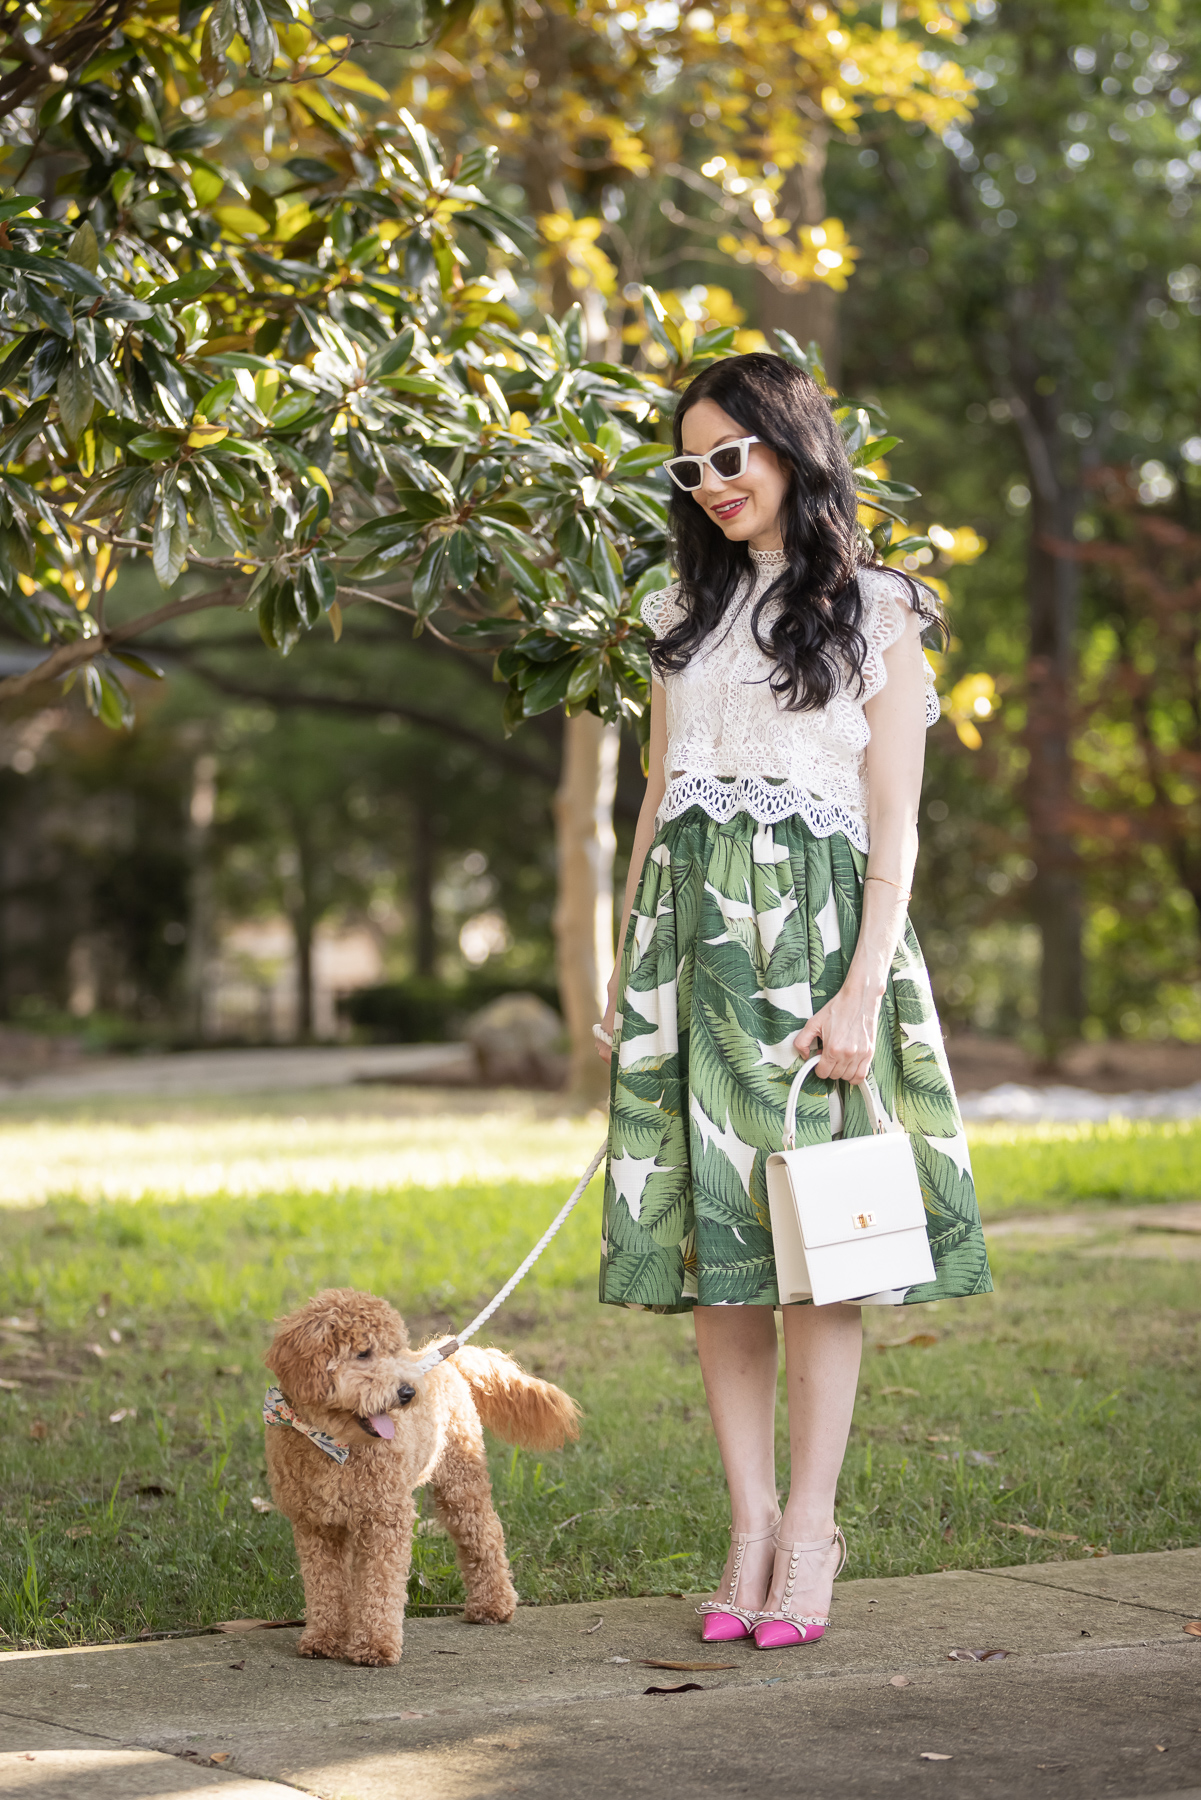 Palm Print Skirt, Neely & Chloe Bag, White Lace Top, Pink Pumps, Fashion Blogger, Fall Transitional Style, Mini Goldendoodle puppy, Fashion Blogger | Palm Print Skirt by popular Dallas fashion blog, Pretty Little Shoppers: image of a woman walking her dog outside and wearing a palm print skirt, lace cropped top, and pink heels. 